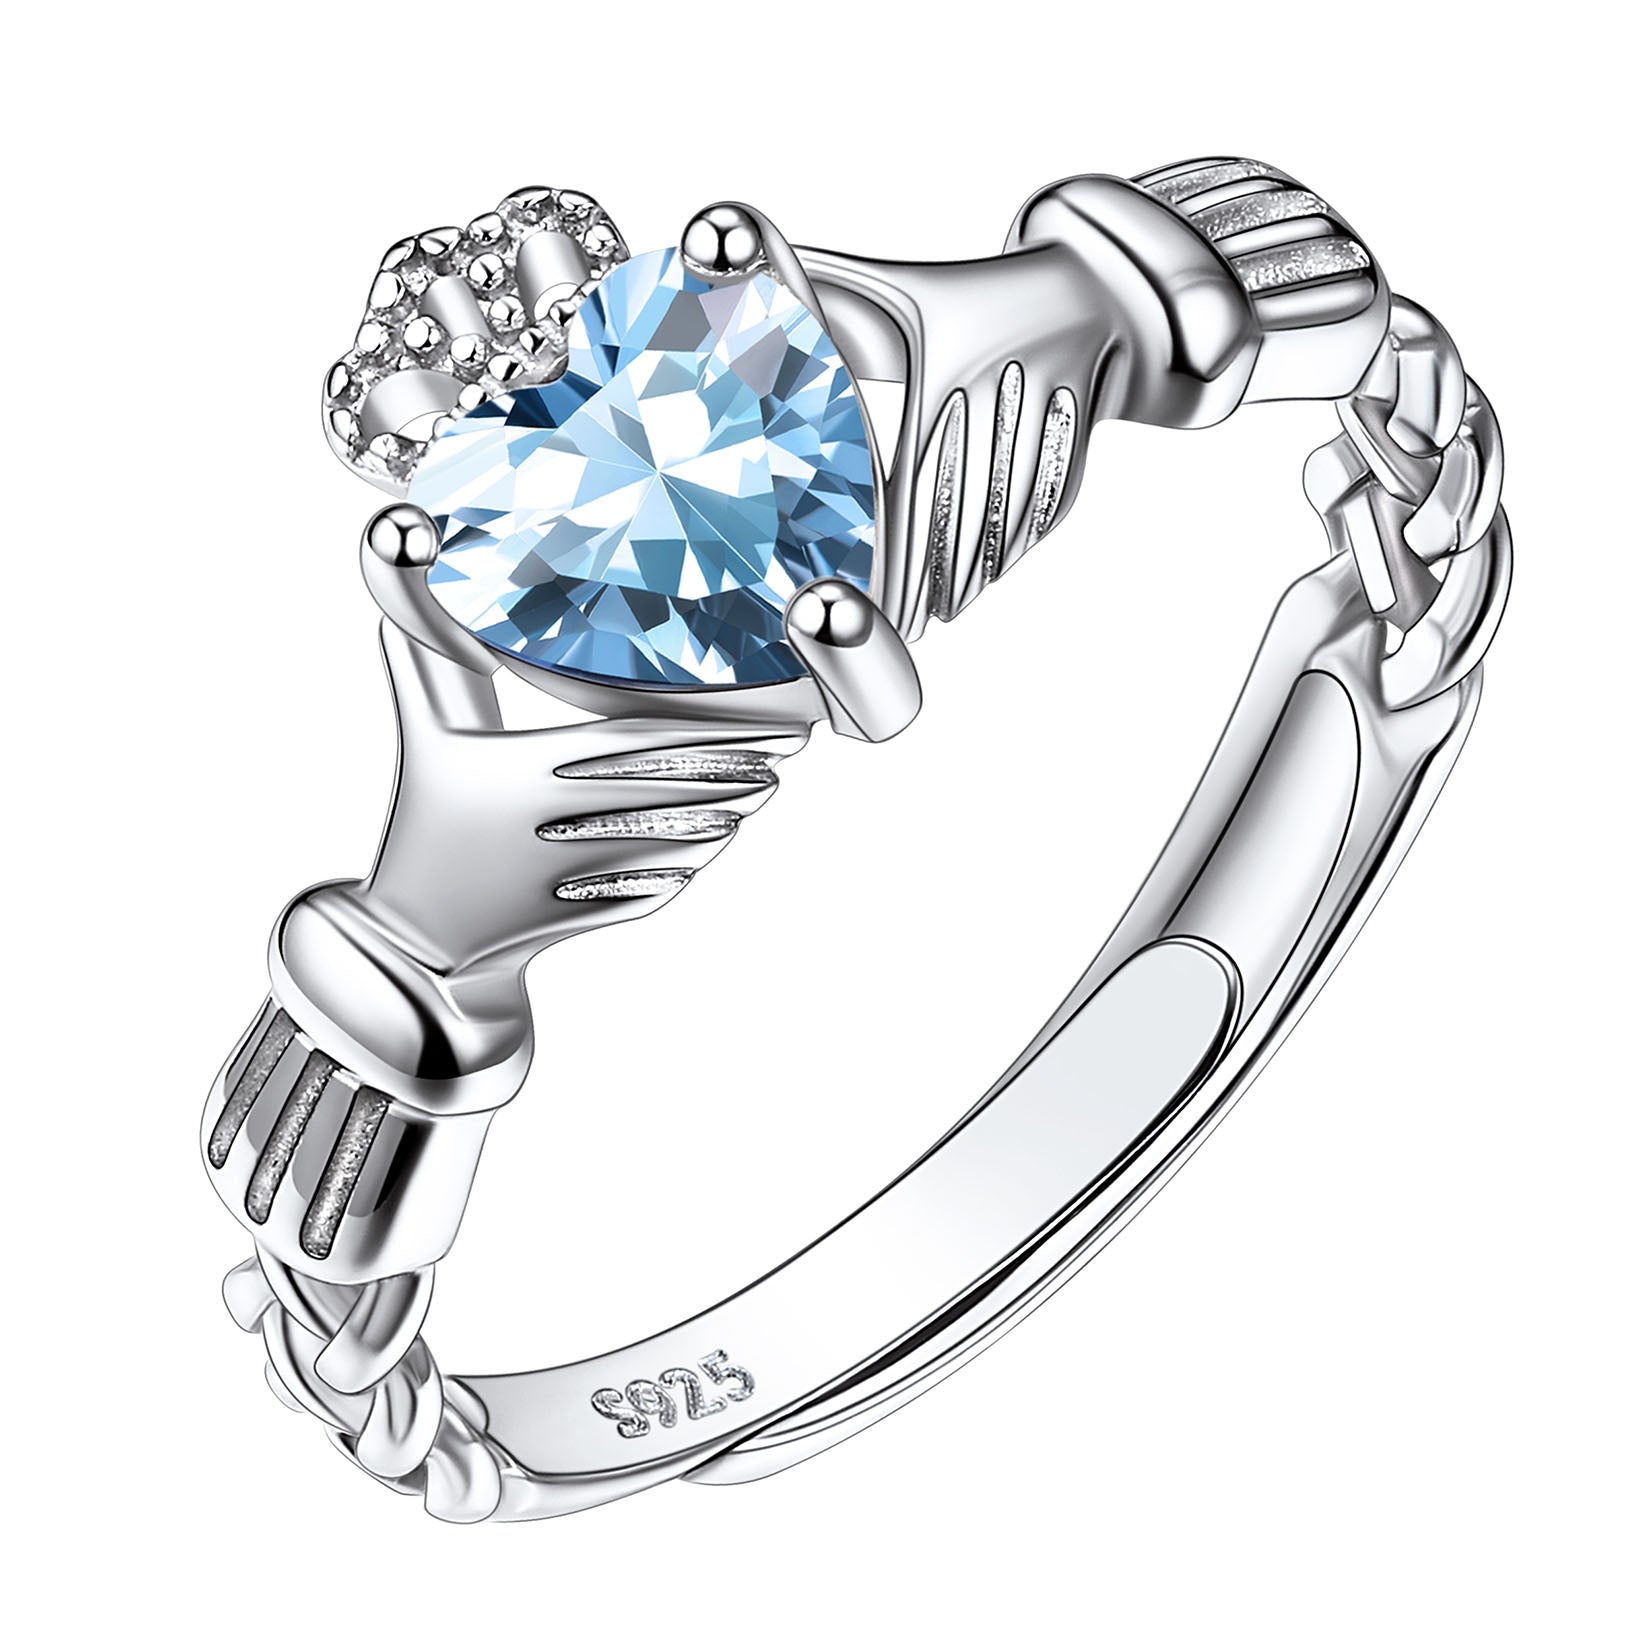 Sterling Silver Claddagh Promise Ring With March Birthstone Aquamarine BIRTHSTONES JEWELRY